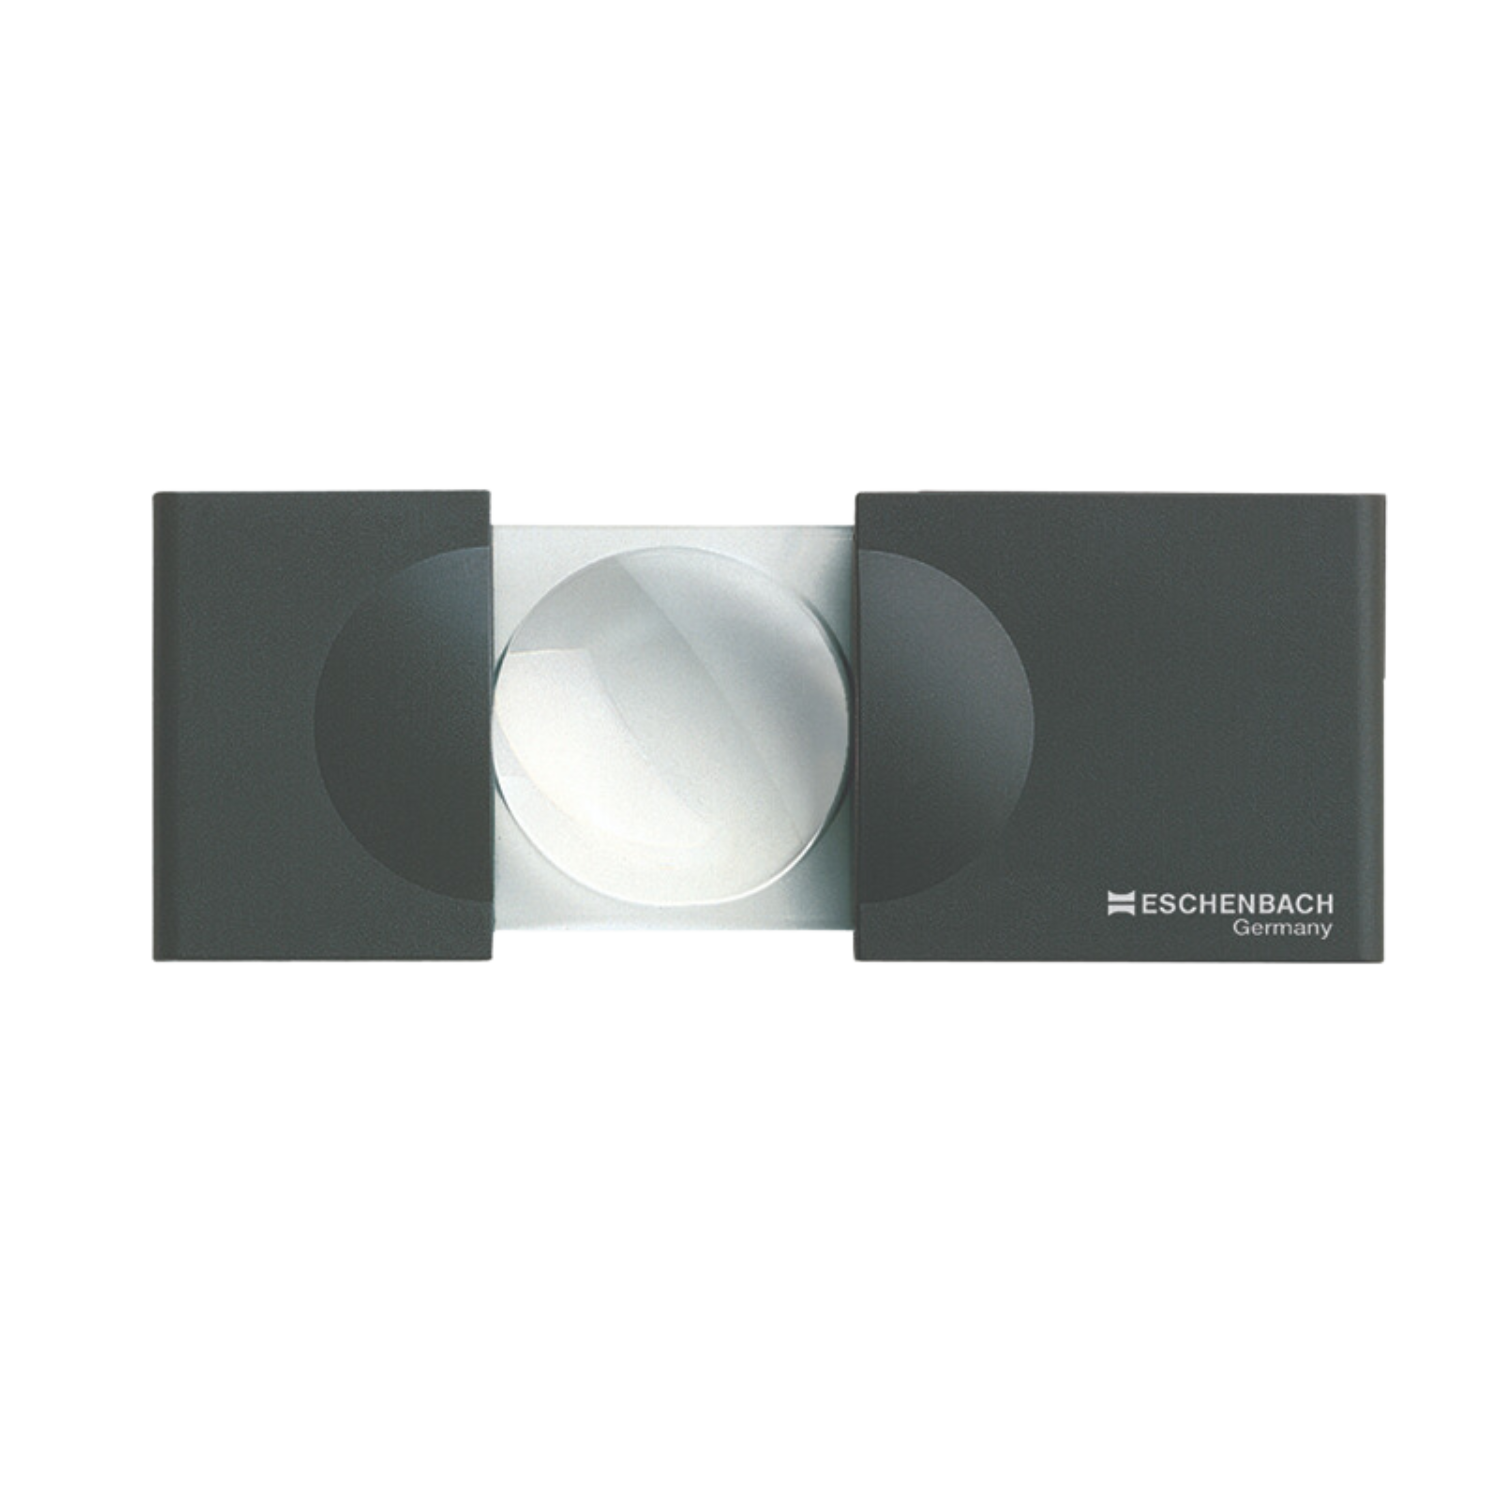 Image of the Designo 5x compact sliding pocket magnifier from Eschenbach.